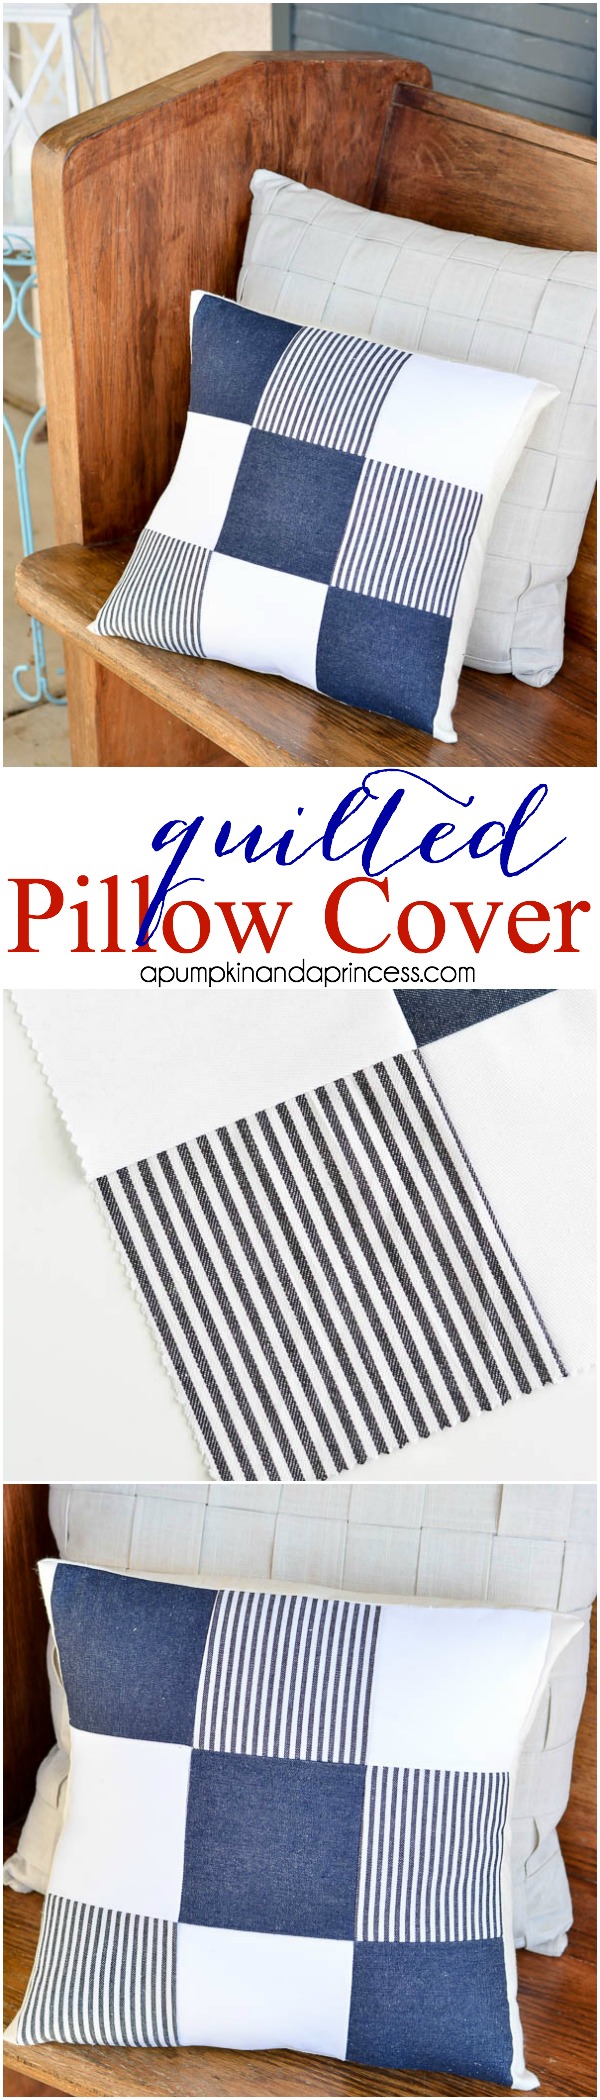 DIY Quilted Pillow Cover